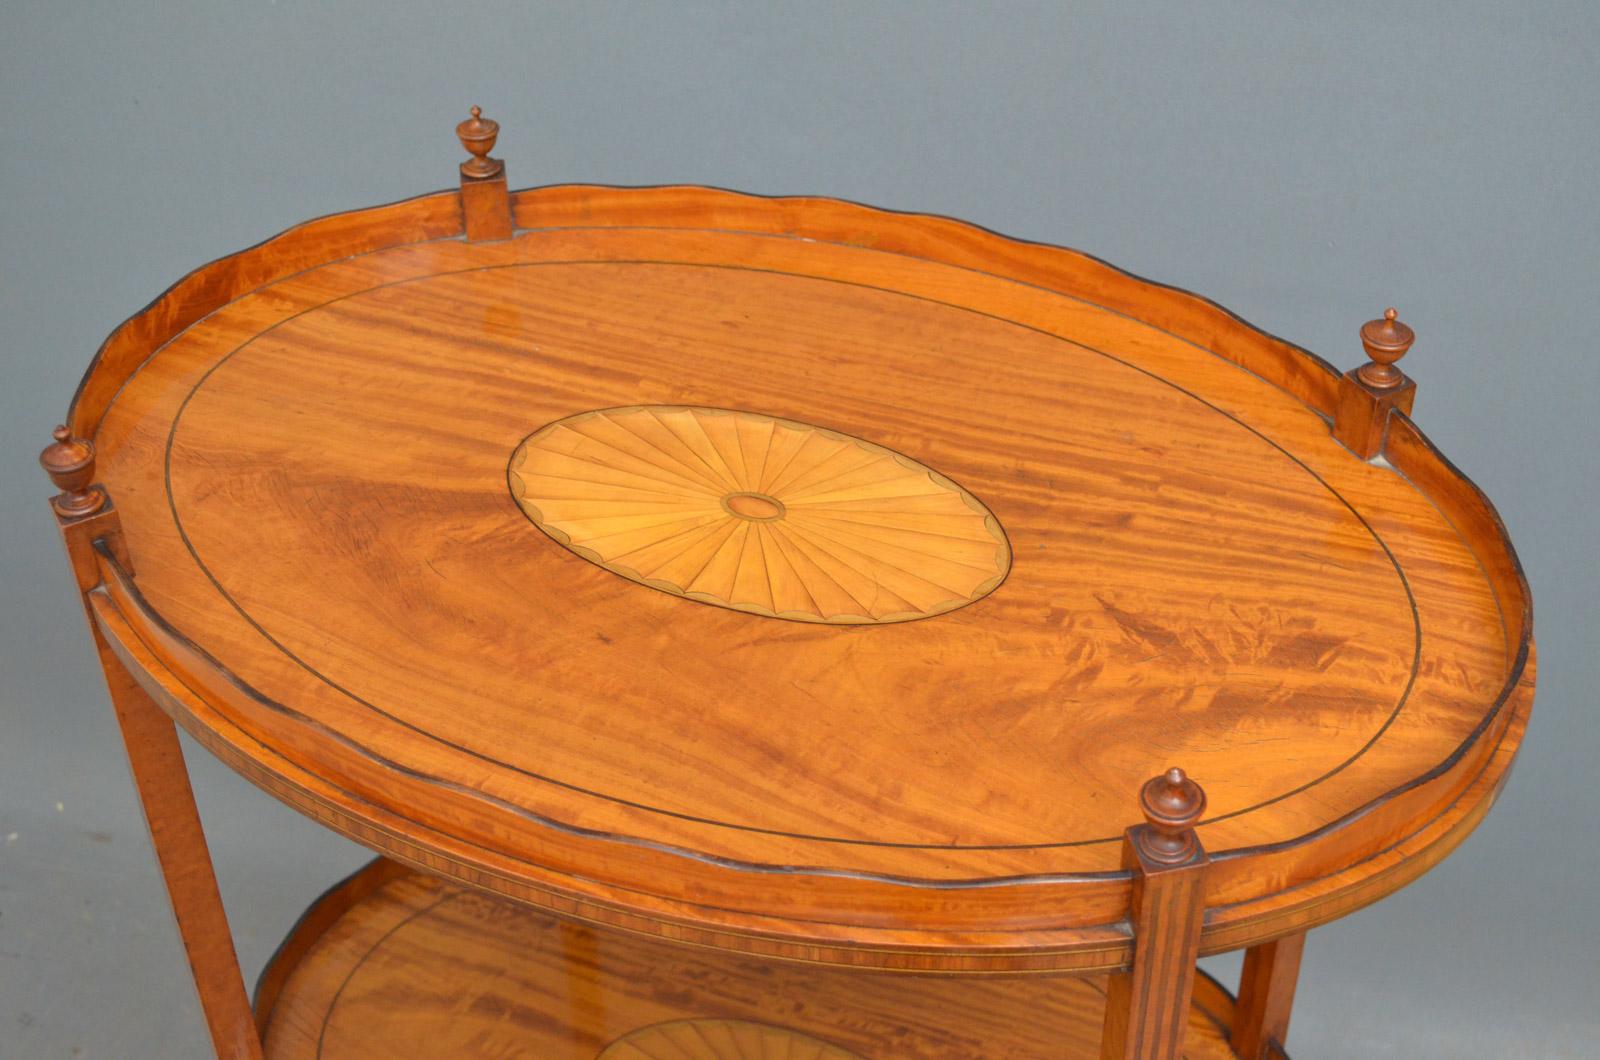 Sn4484, late Victorian satinwood tray table of oval form with two-tier decorated with sunburst inlays and solid shaped gallery with turned finials, standing on slender, string inlaid legs, all in wonderful original condition throughout, circa